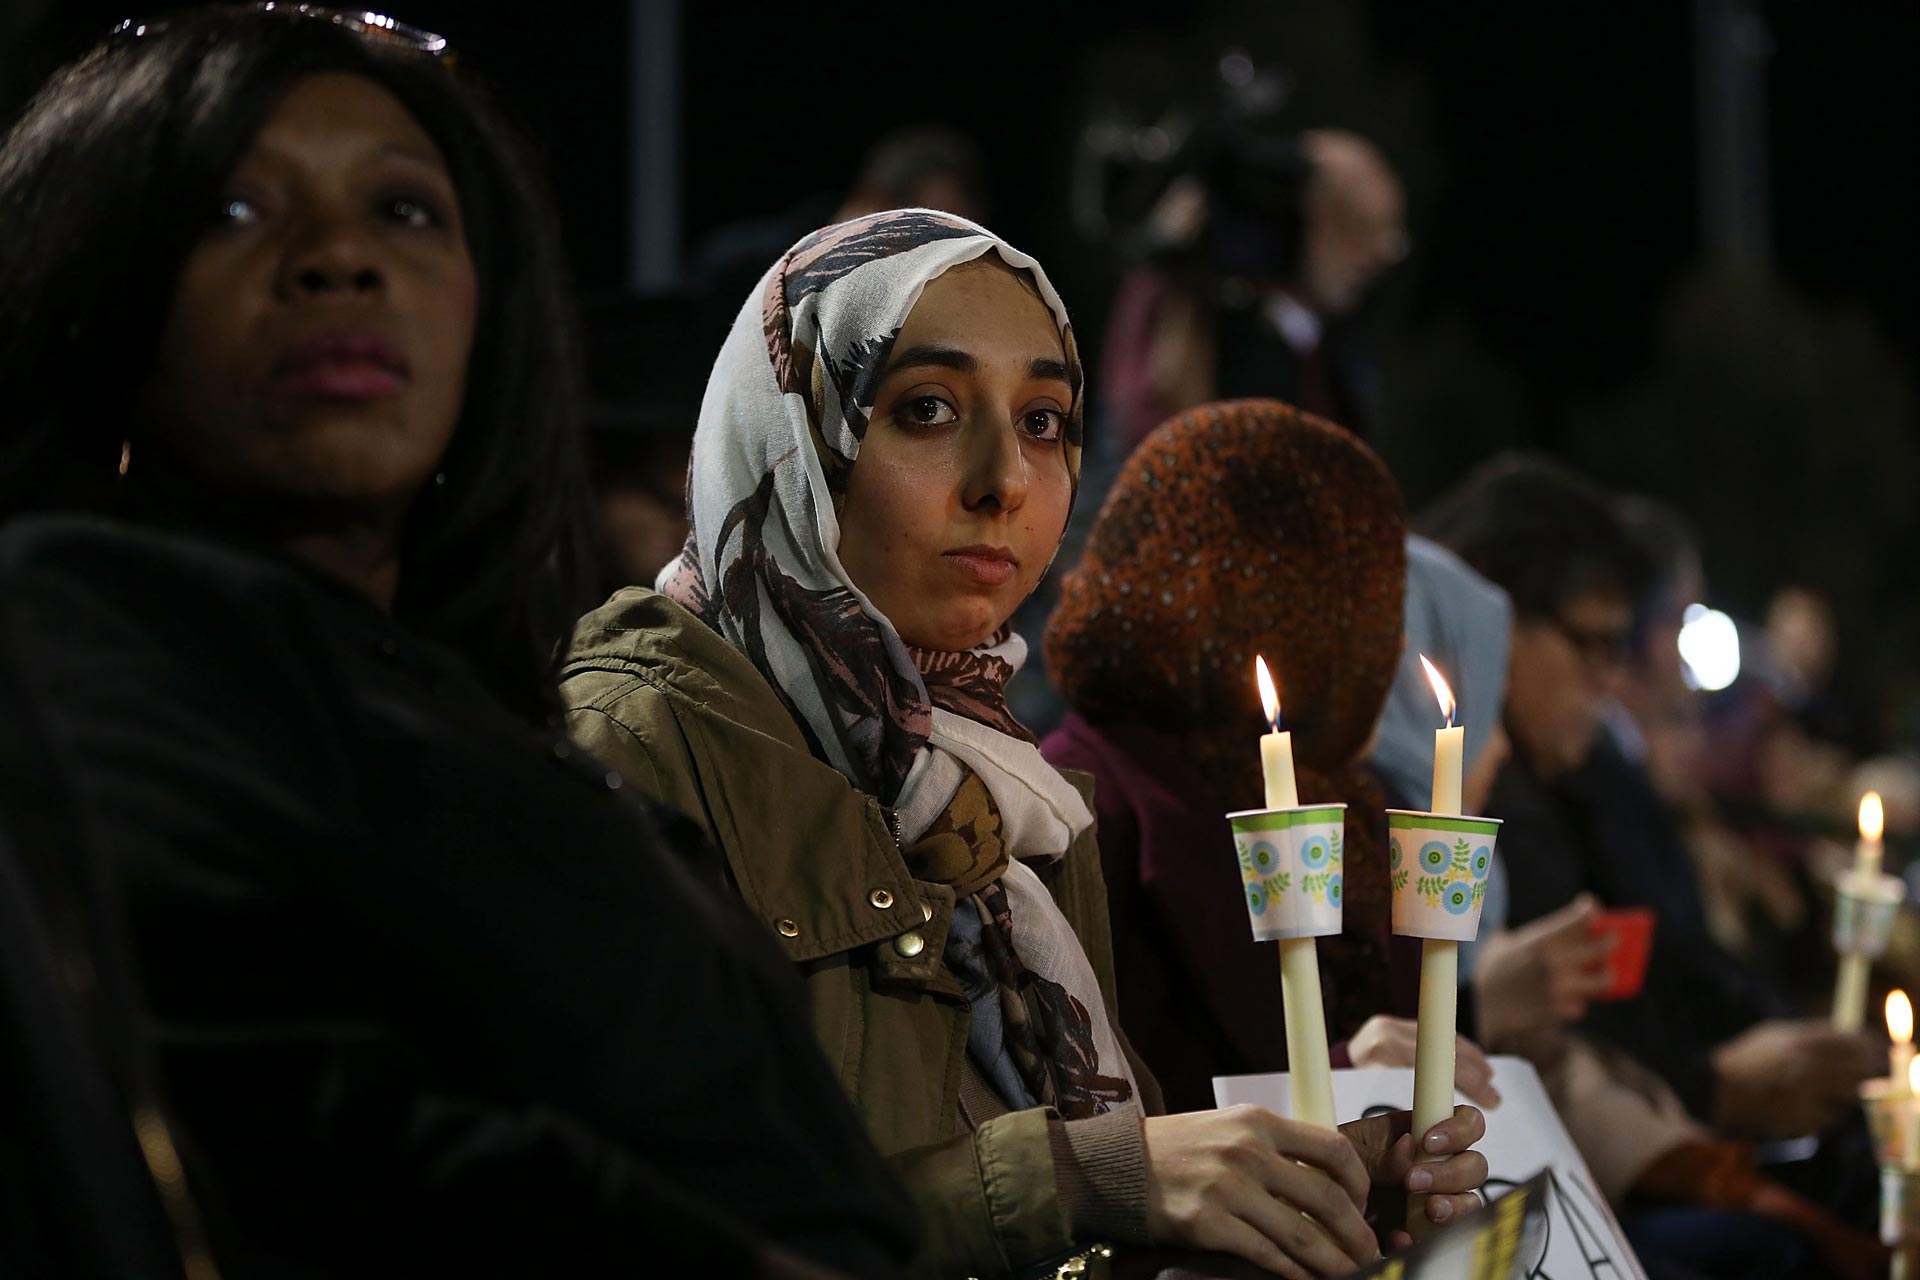 People hold candles as they attend a vigil at the San Manuel Stadium to remember those injured and killed during the shooting at the Inland Regional Center on Dec. 3, 2015 in San Bernardino.